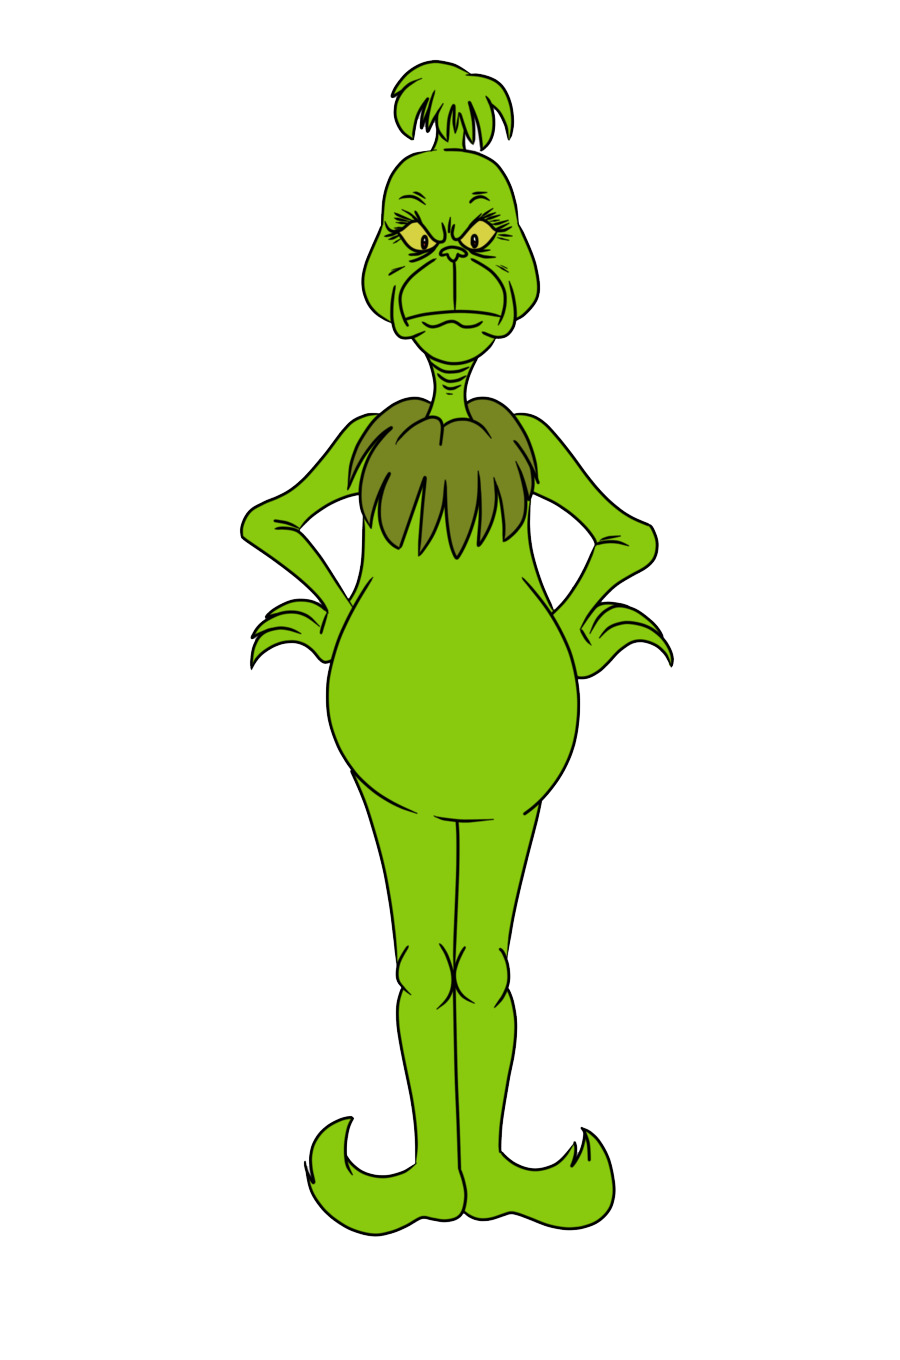 The Grinch PNG Free Download